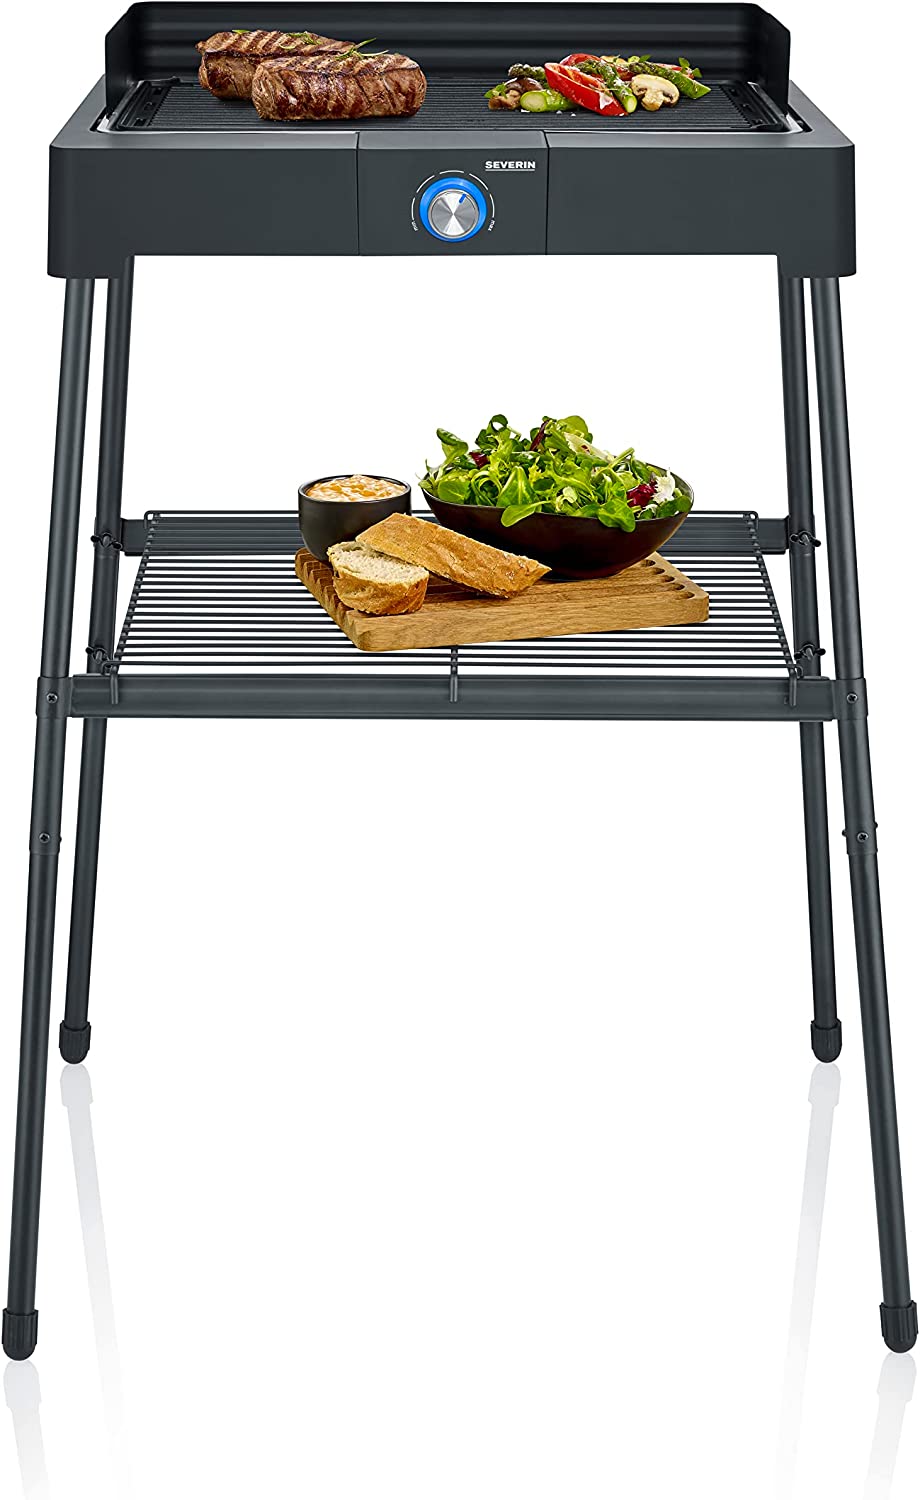 Severin PG 8568 Standing Grill with Aluminum Grill Plate and Stand Frame With Storage Grill, Electric Grill with Quick Grill Start, Balcony Grill Without Risk of Burning, Black